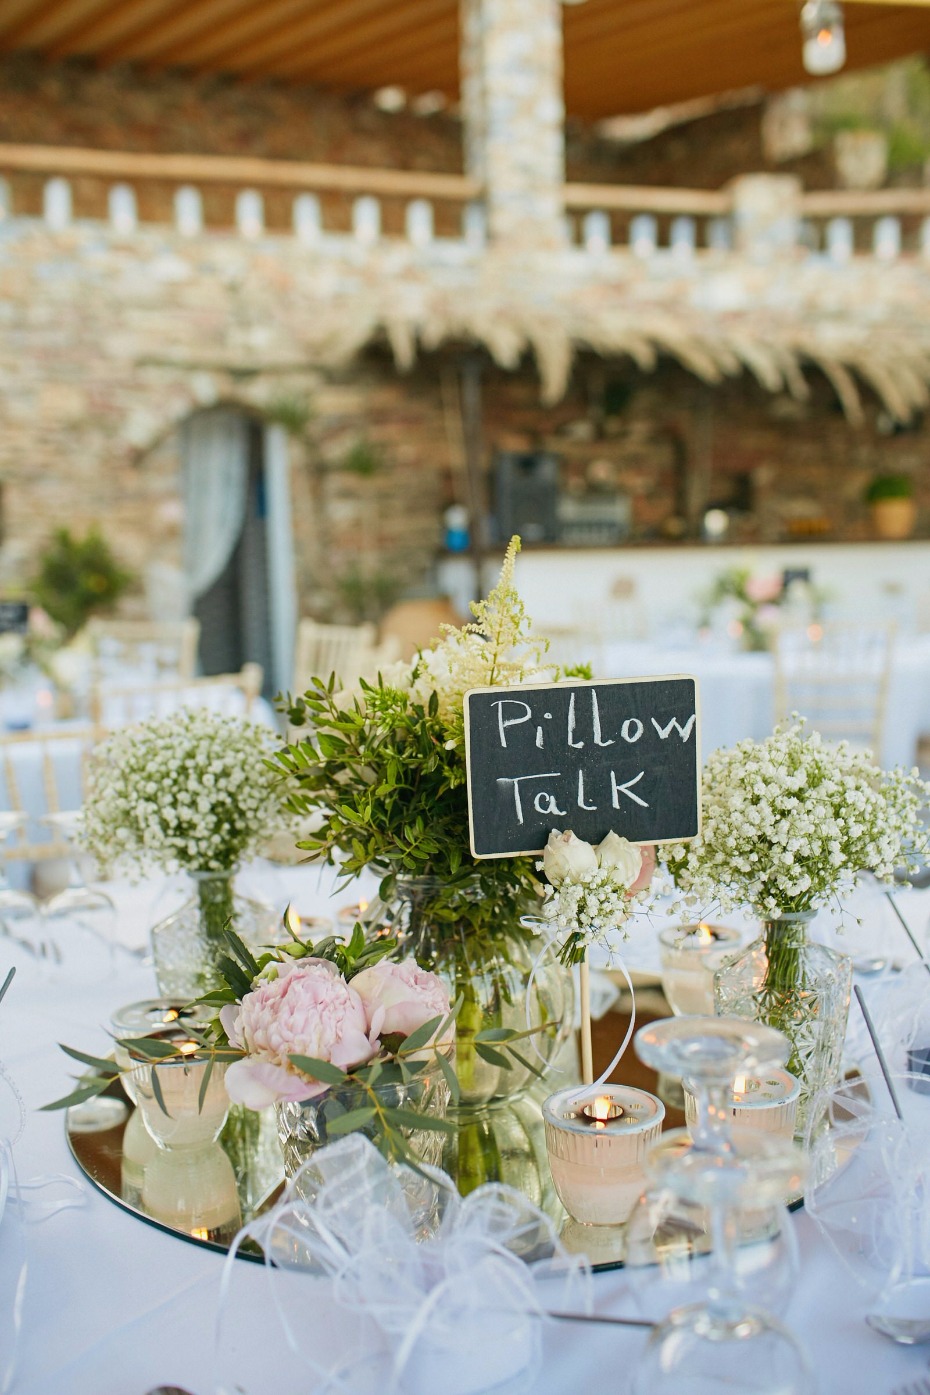 pillow talk wedding table name and whimsial centerpiece